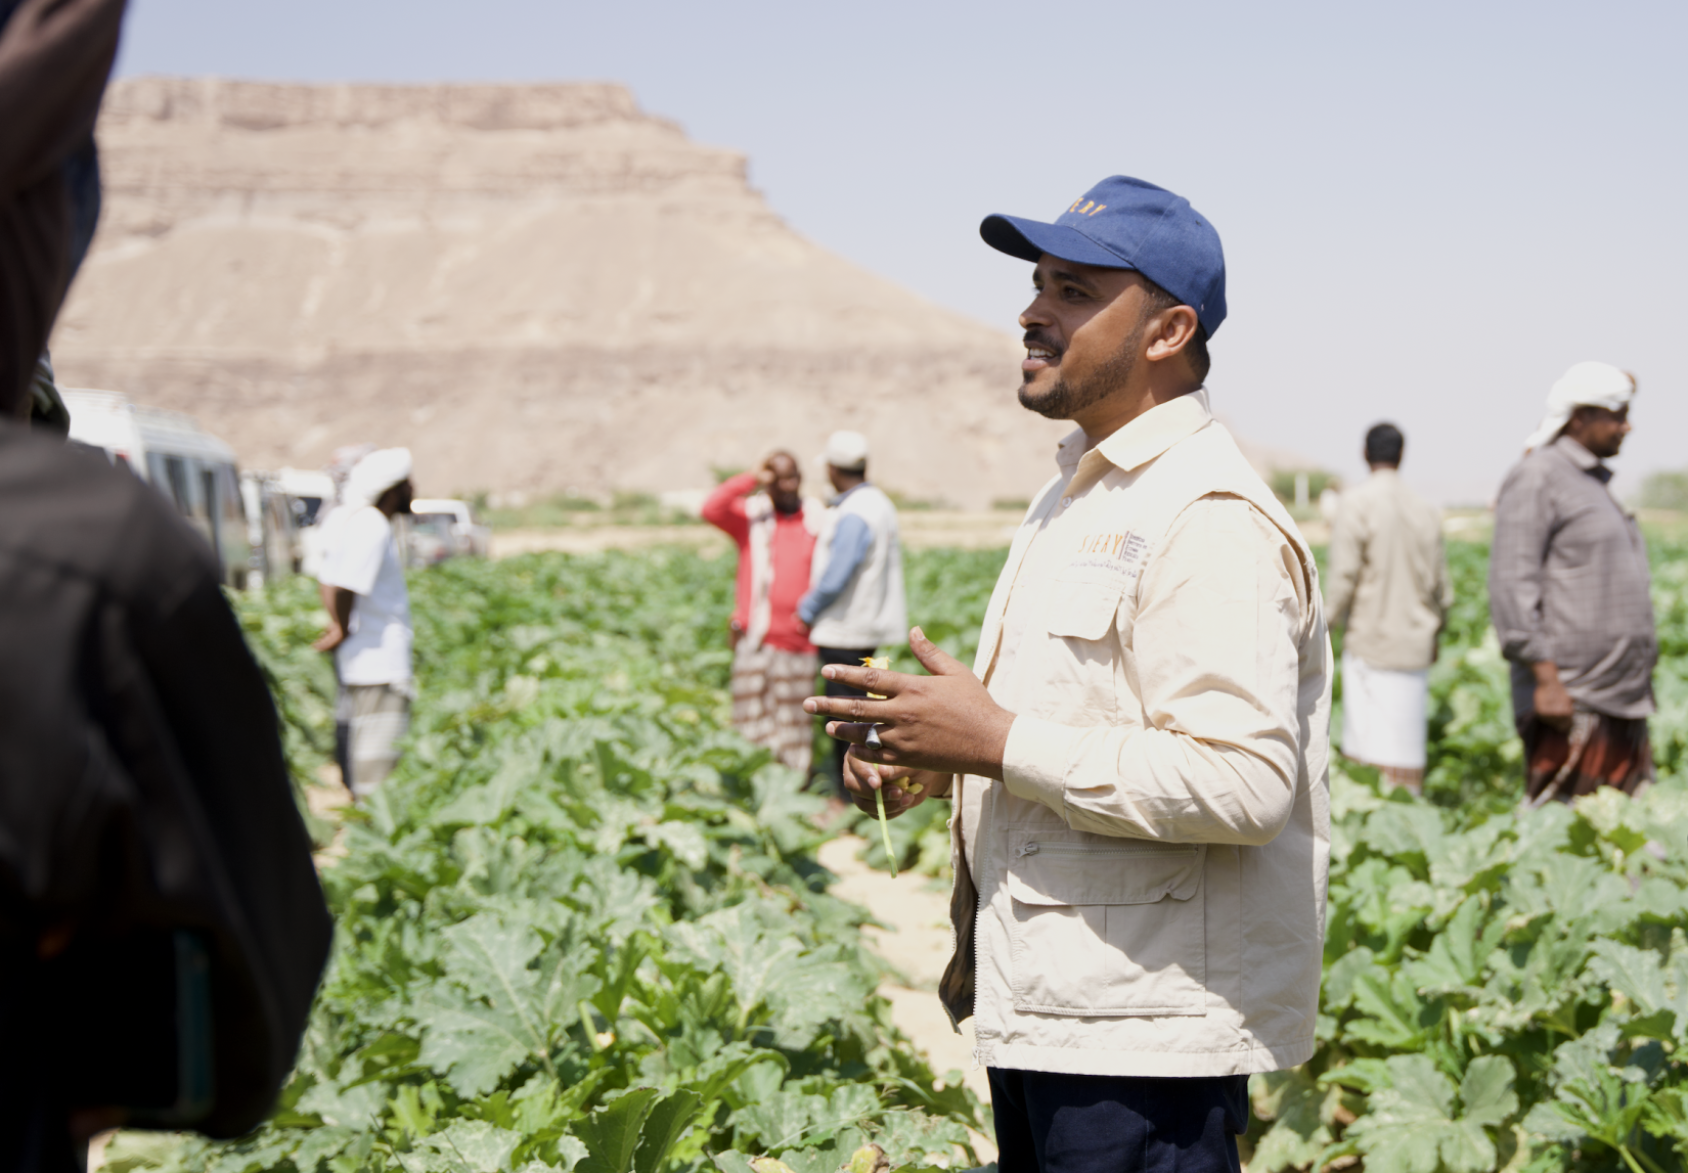 A man in a white shirt and blue cap stands in a green farm while farm workers work in the background